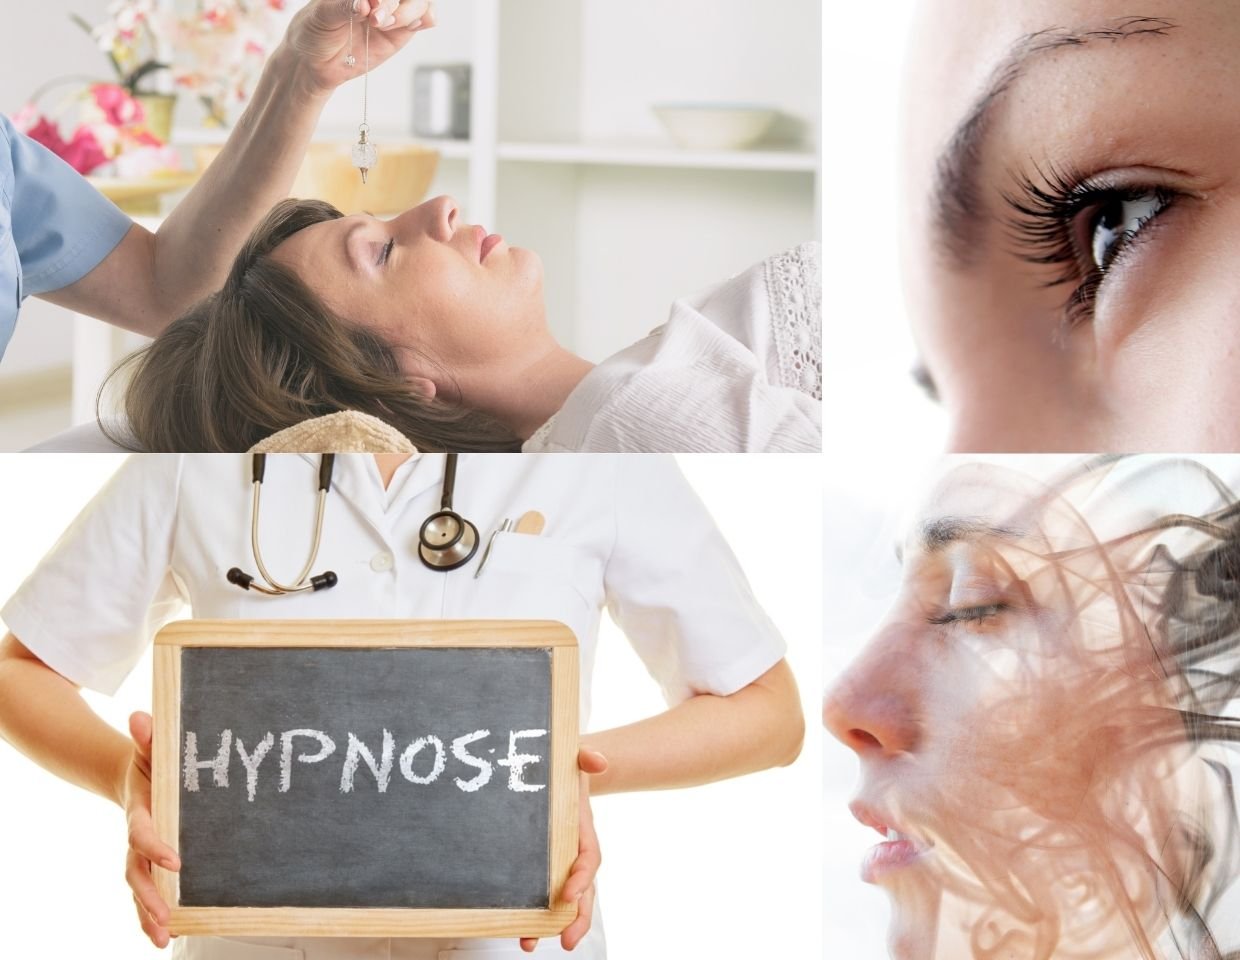 HYPNOSIS AND BETTER HEALTH